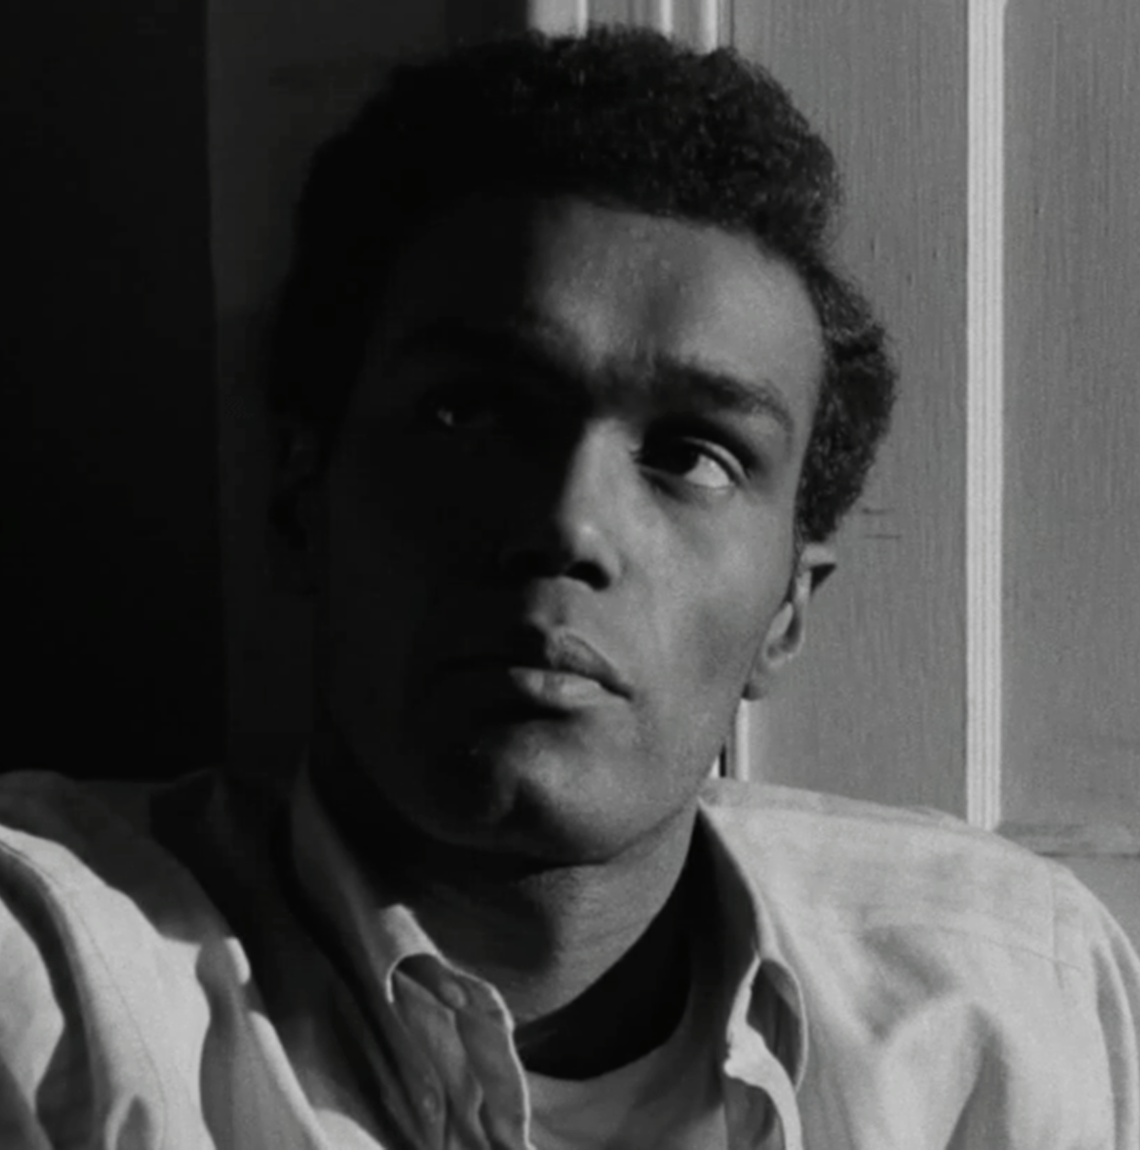 screen still of Duane Jones as Ben in "Night of the Living Dead." He is leaning back, and half of his face is in shadow